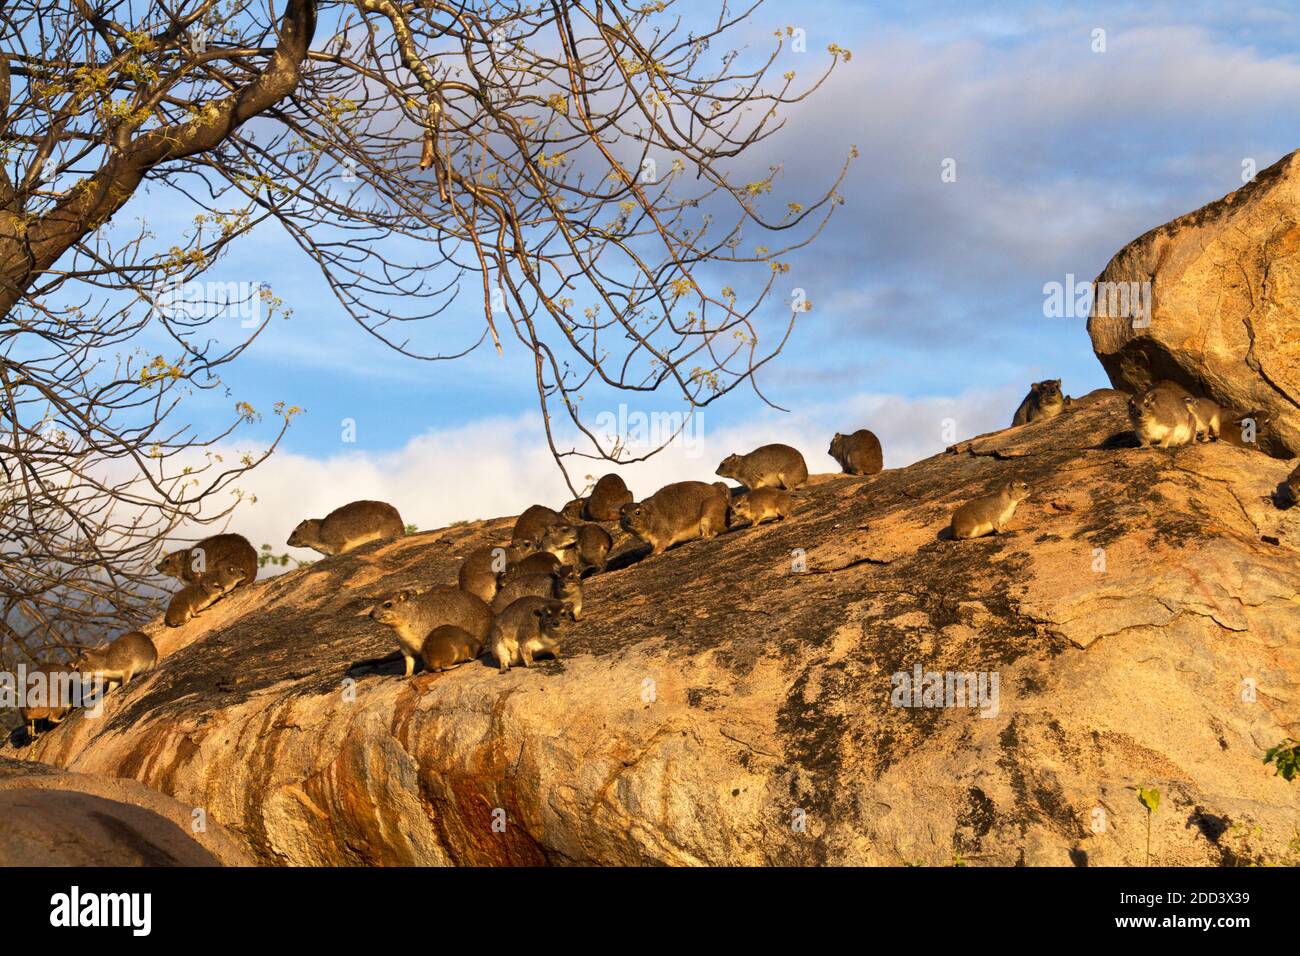 A colony of Bush Hyrax sunbath in the afternoon light before they huddle in crevasses in the granite boulders during the night. Stock Photo